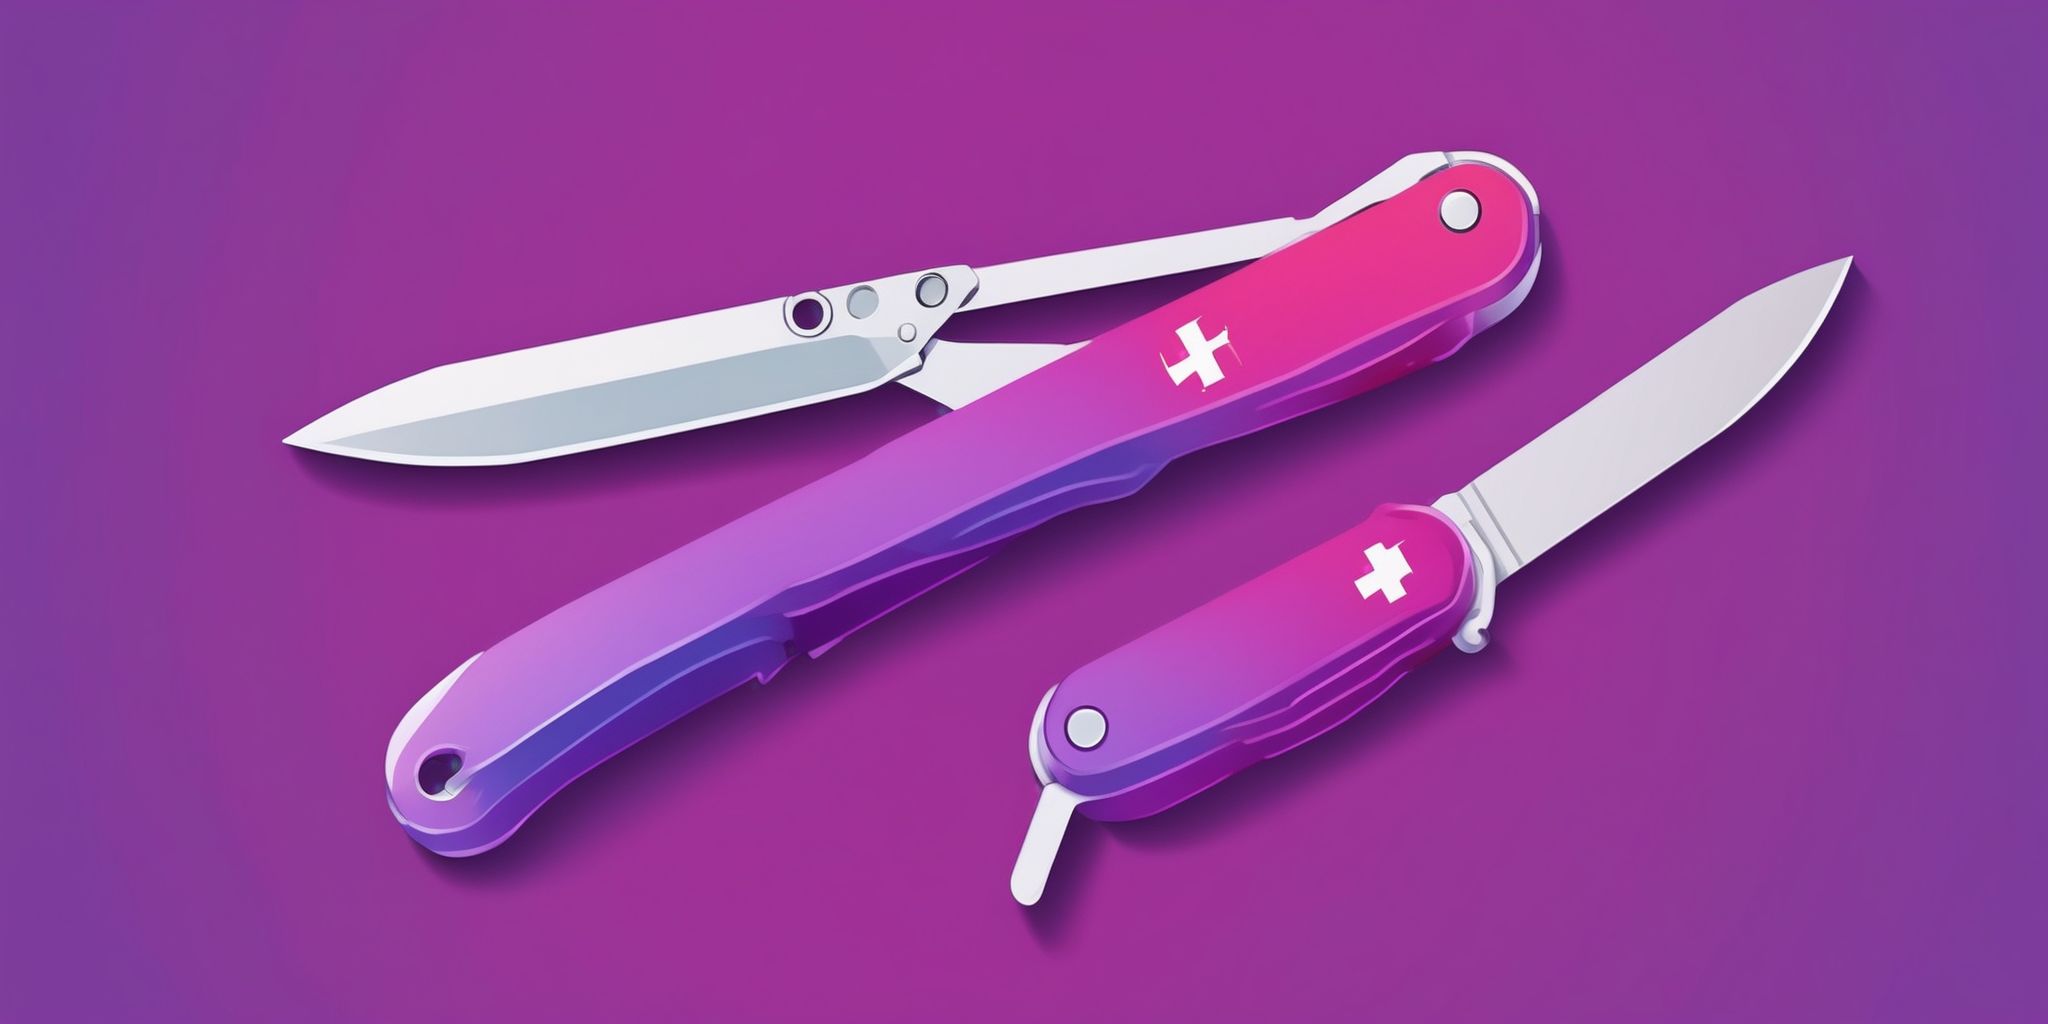 Swiss army knife in flat illustration style, colorful purple gradient colors